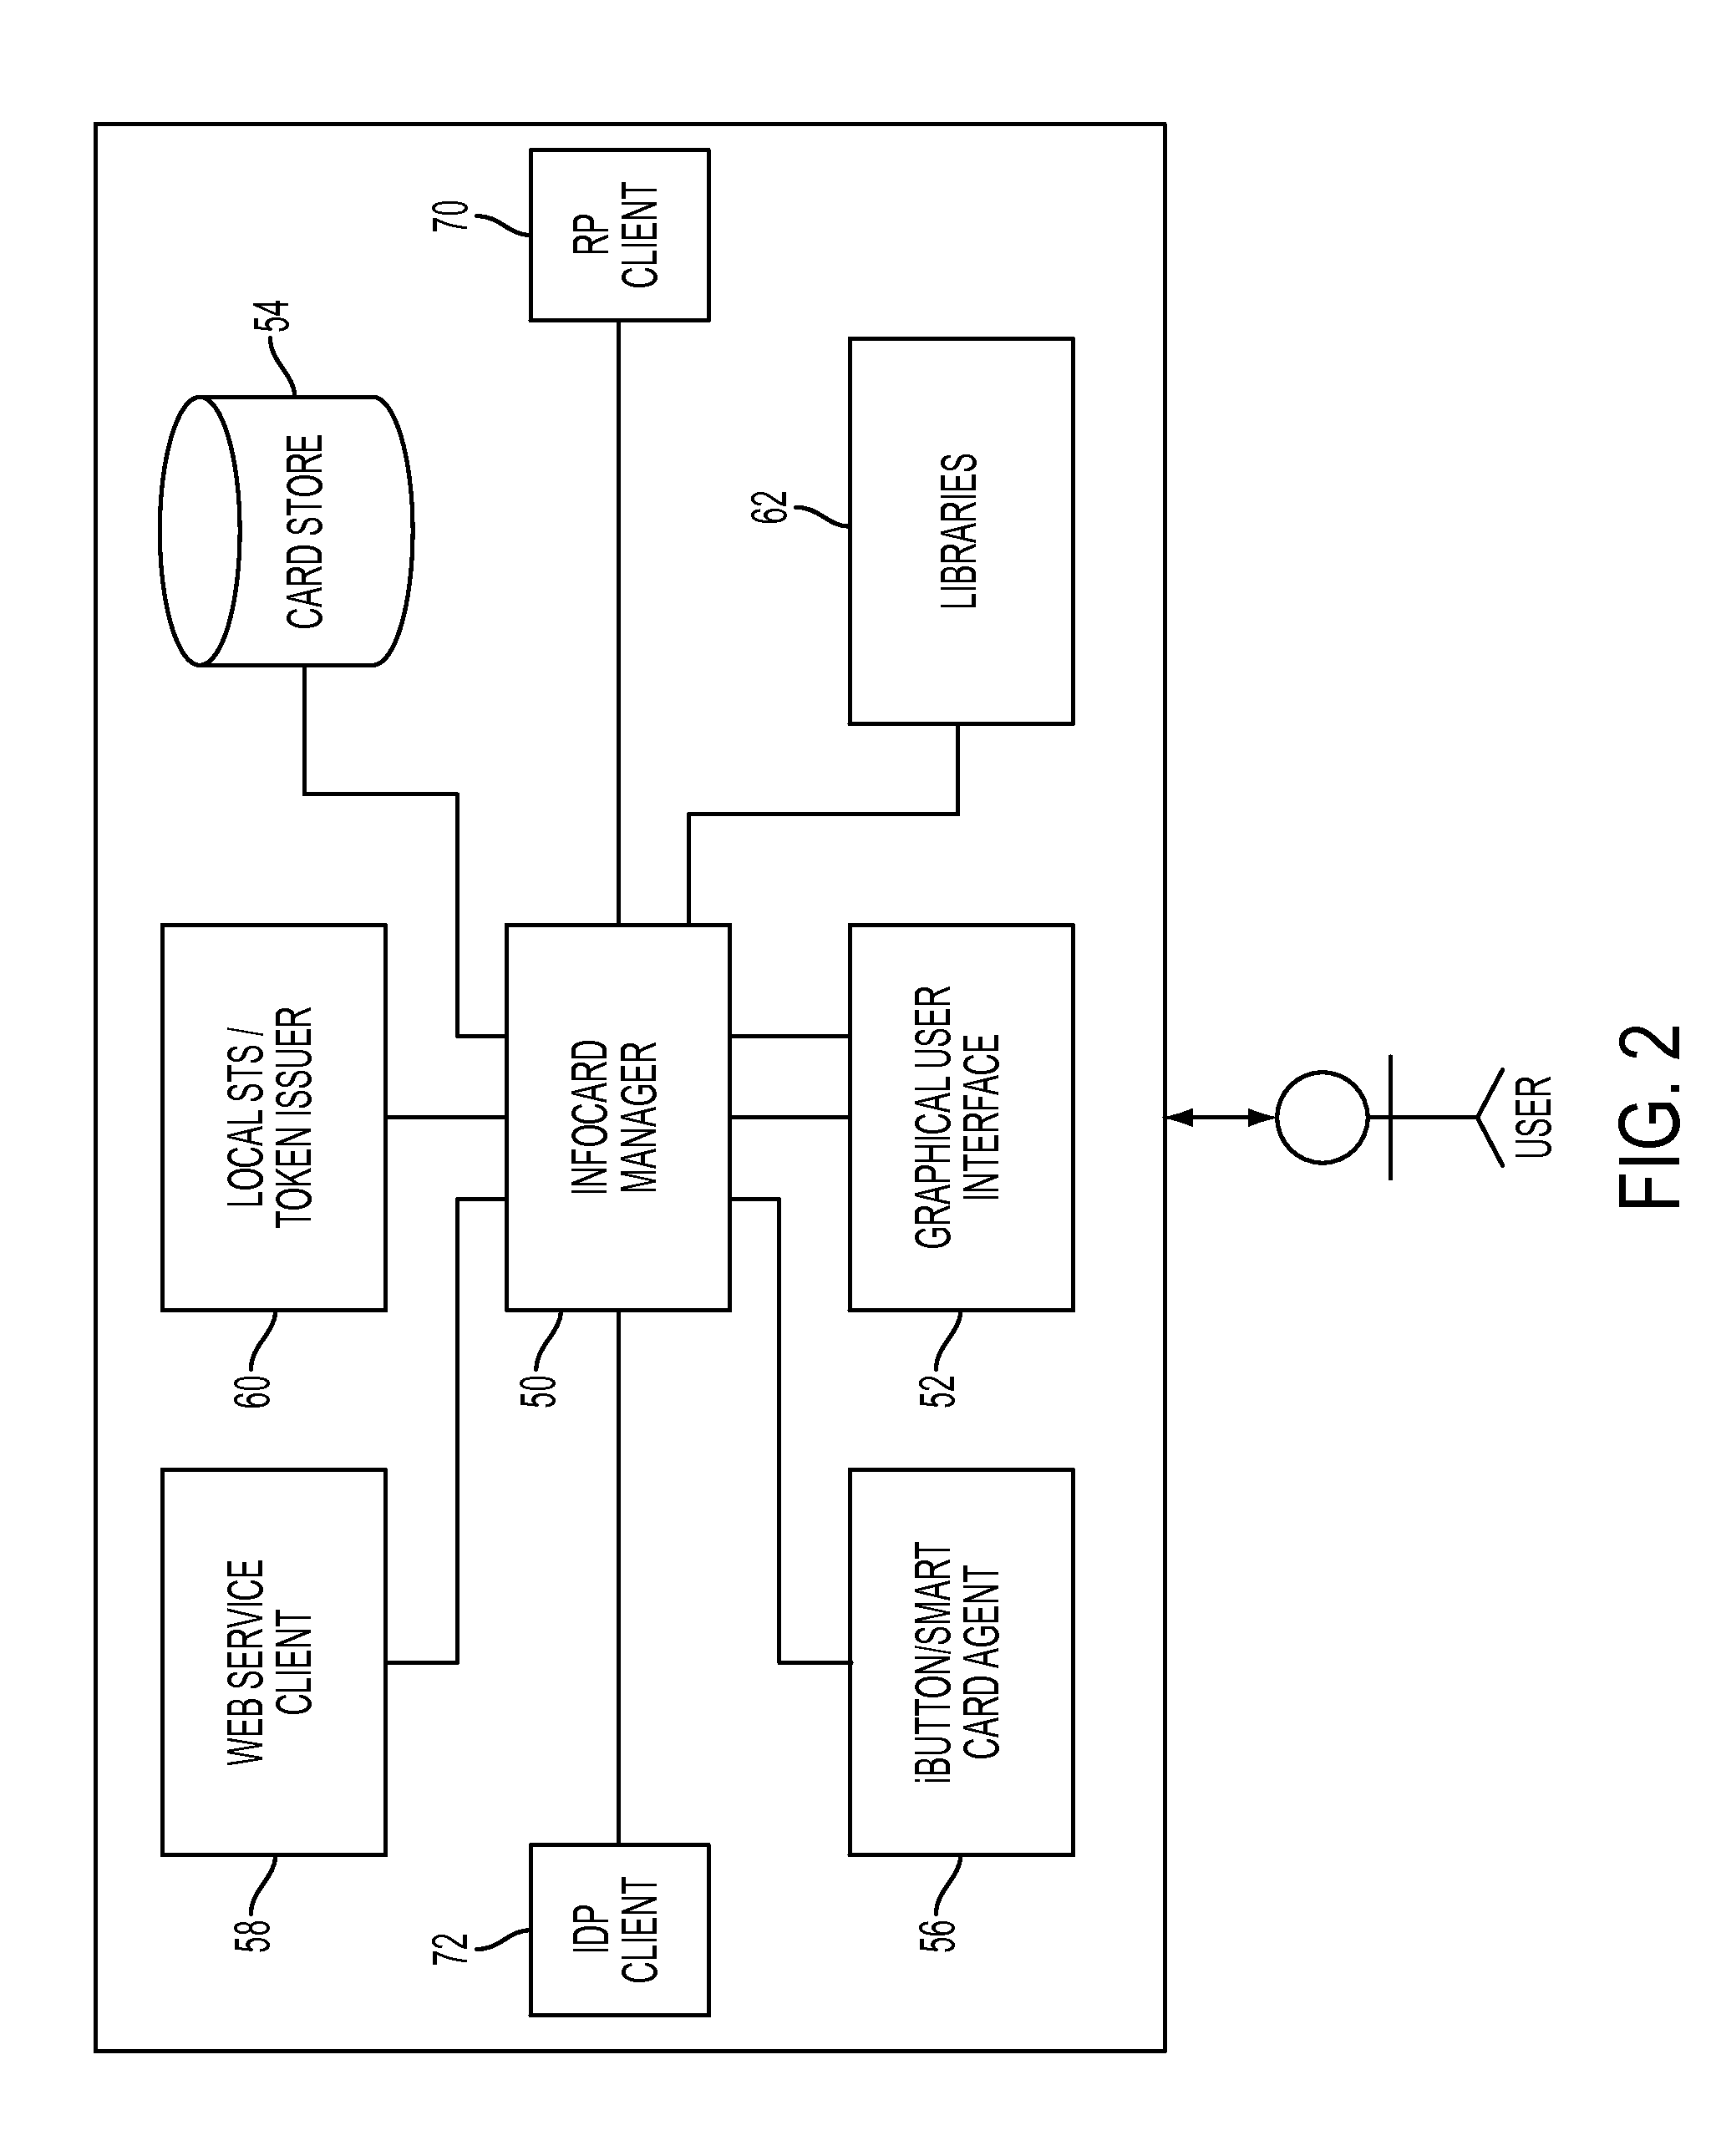 User-portable device and method of use in a user-centric identity management system